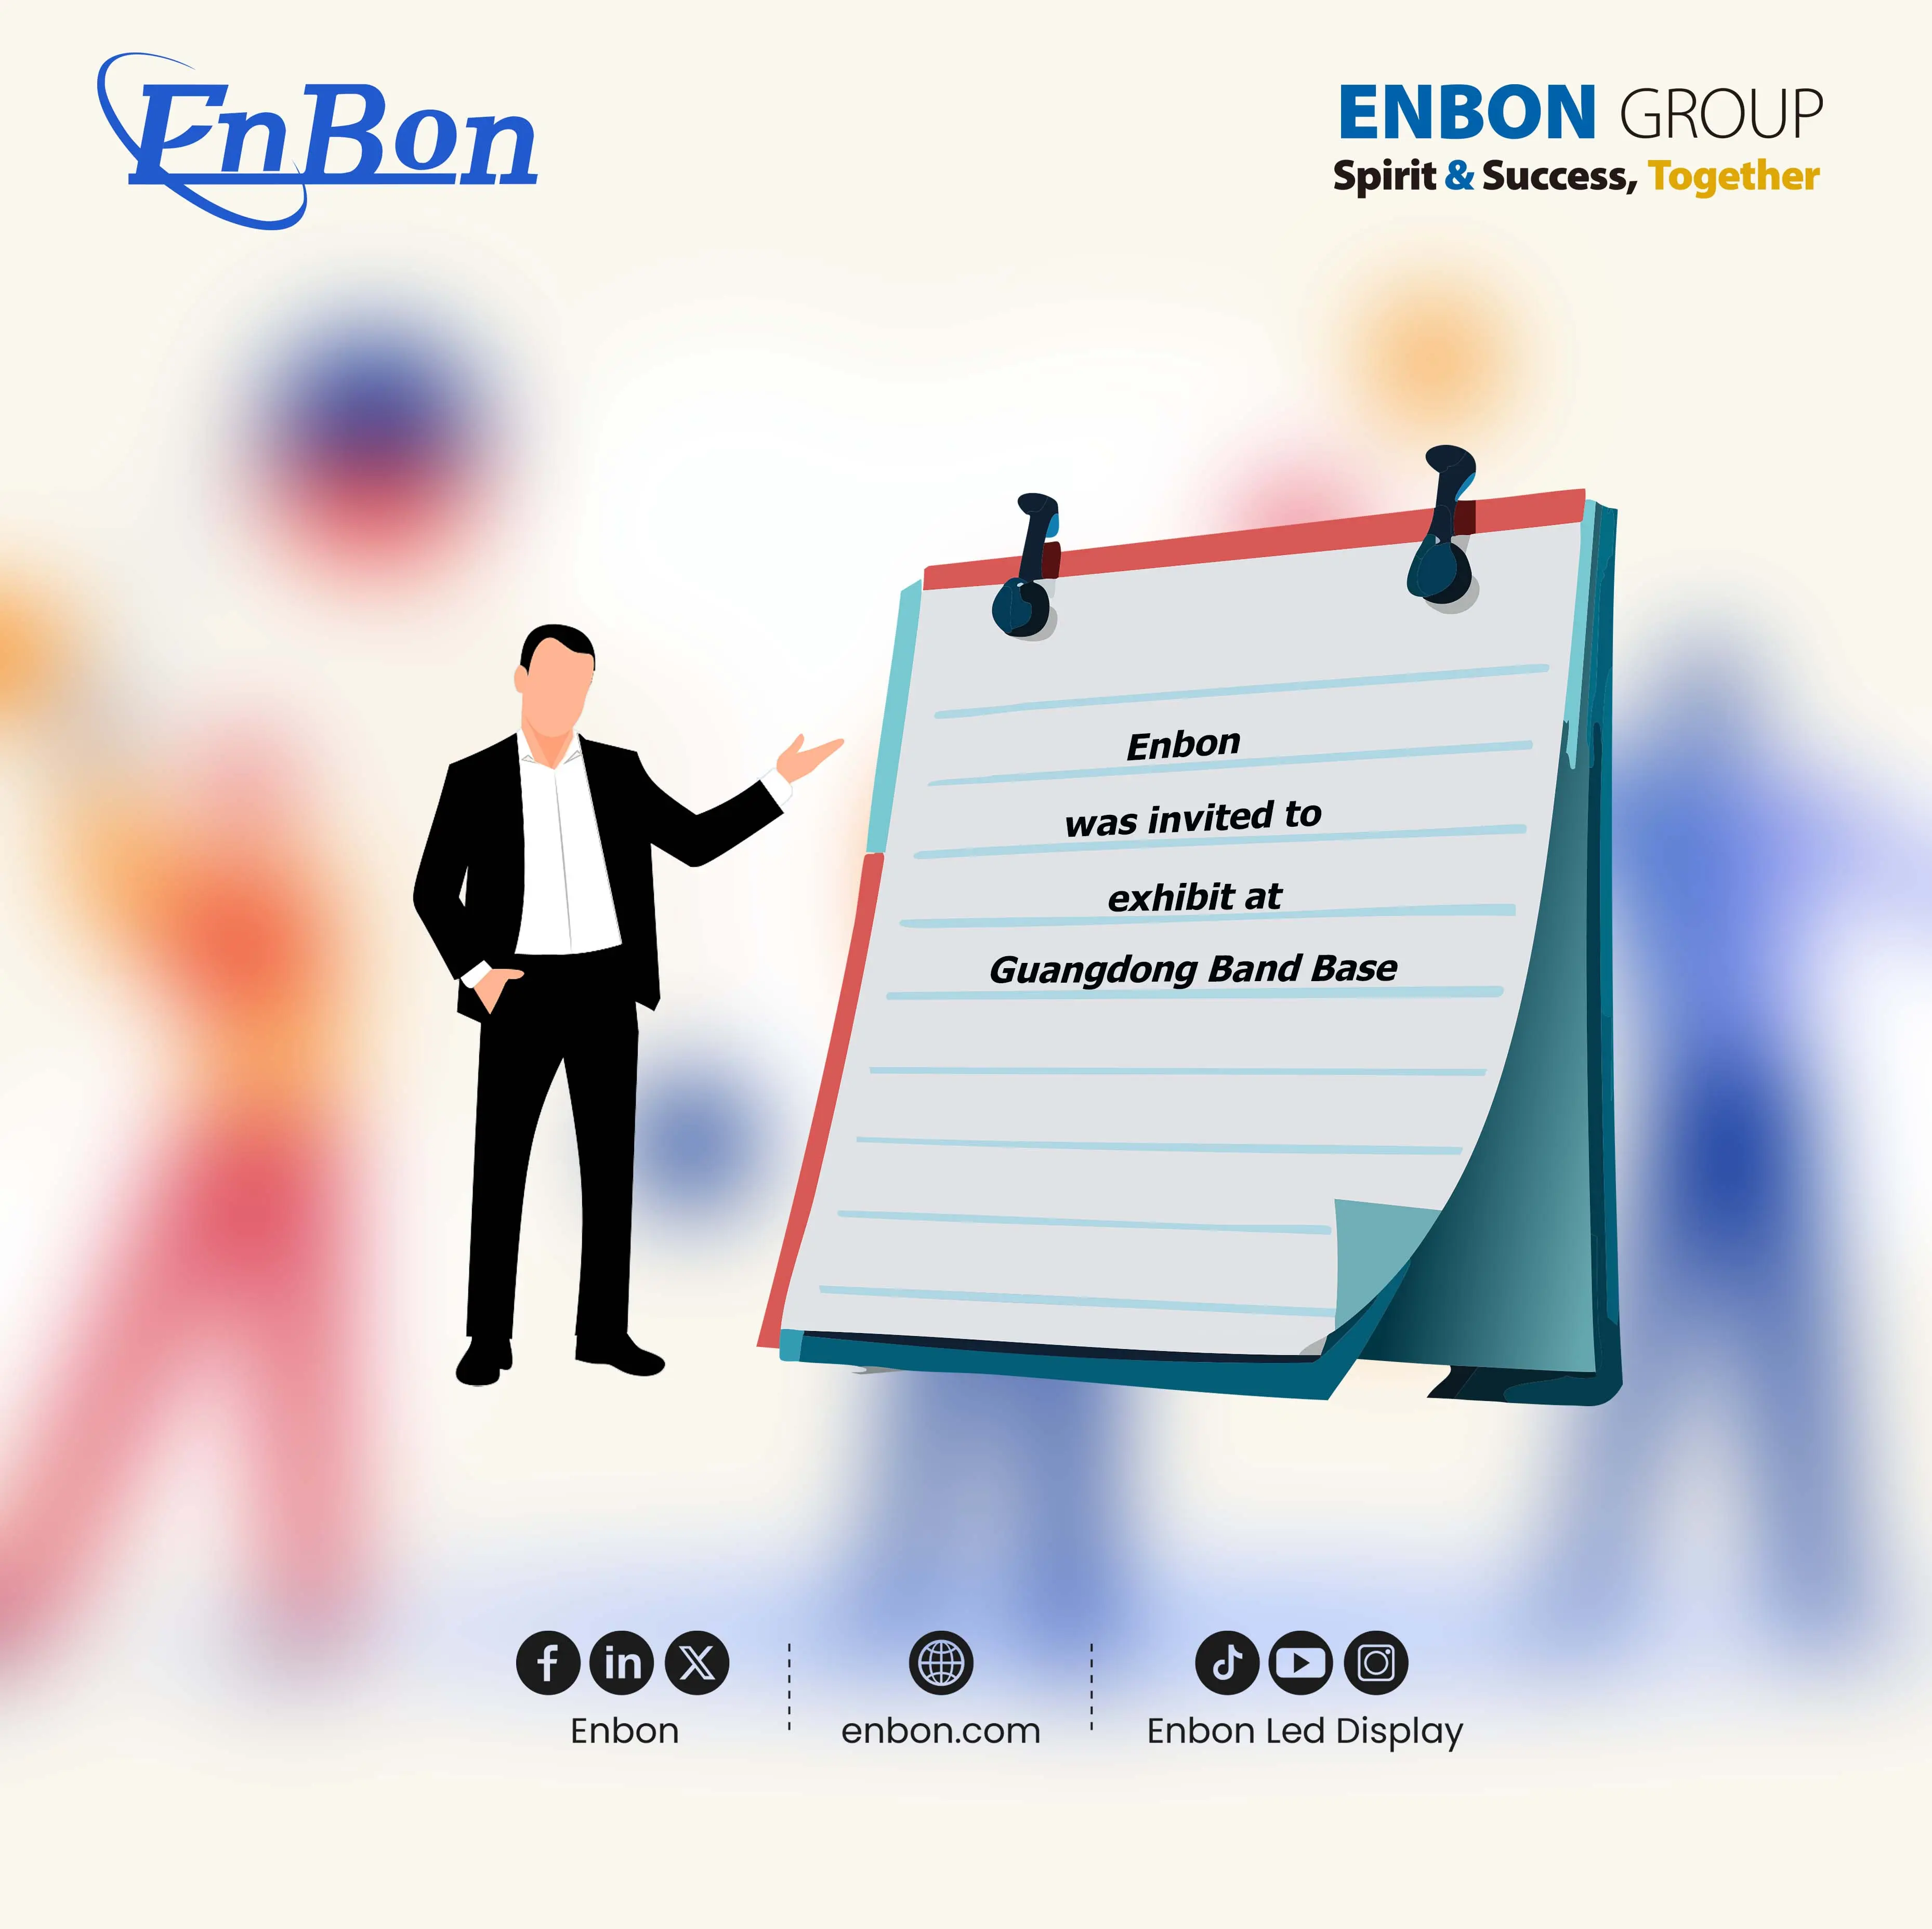 Enbon was invited to exhibit at Guangdong Brand Base